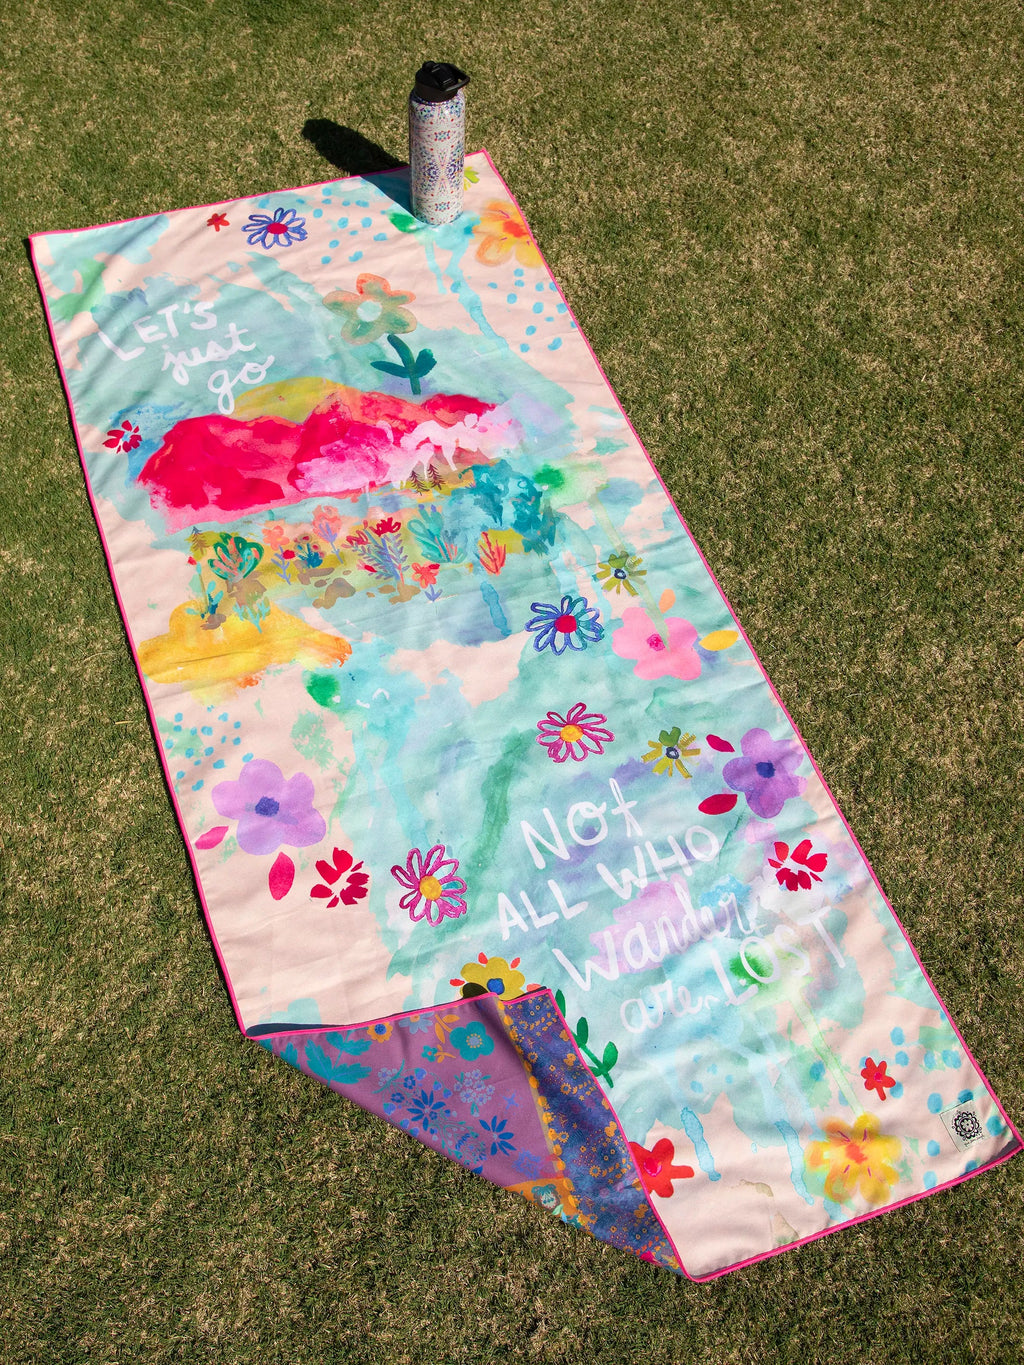 Natural Life - Double-Sided Microfiber Beach Towel - Let’s Just Go